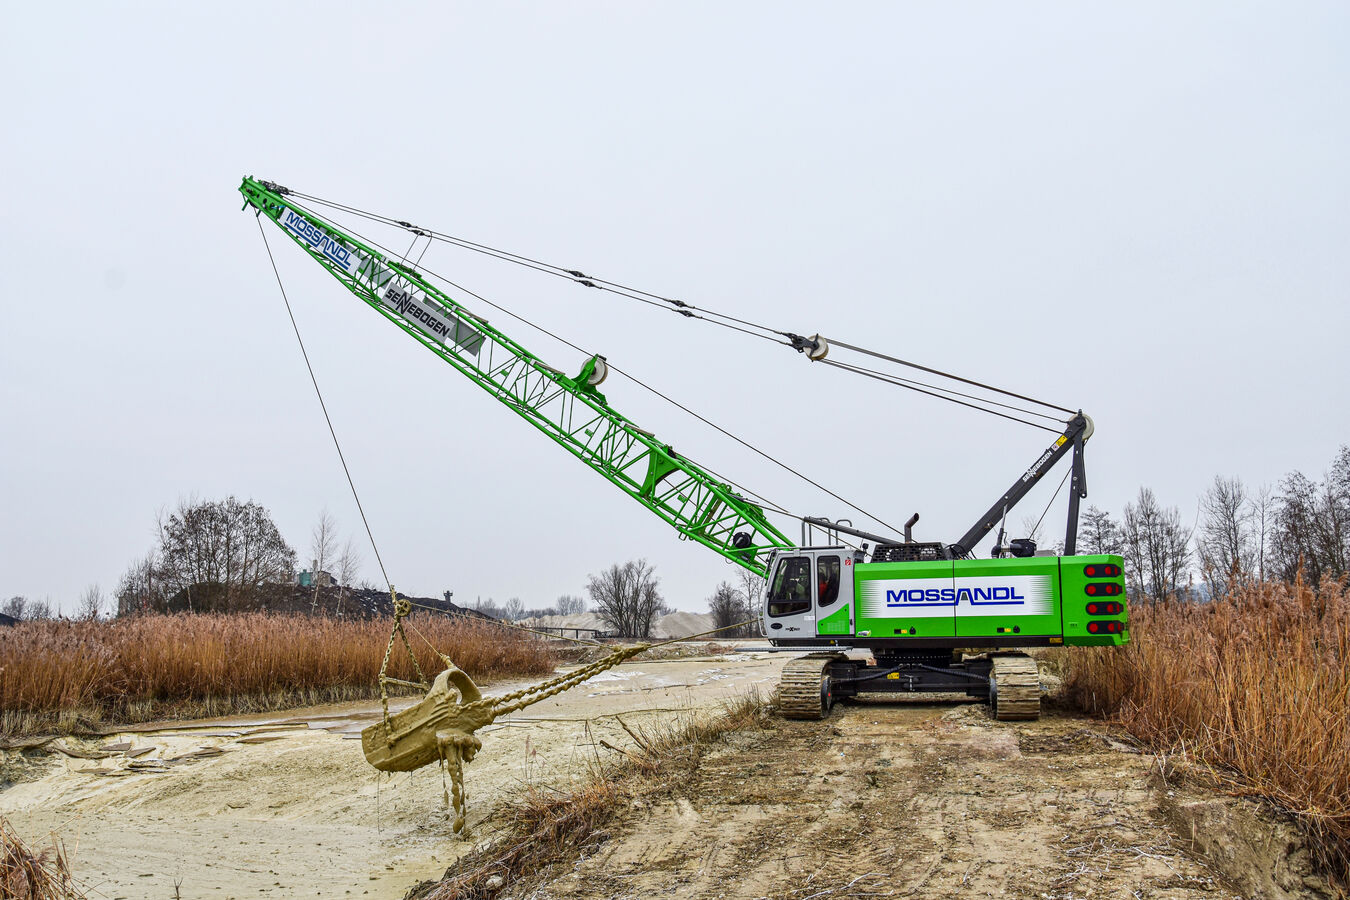 The 655E HD crane is equipped with a Hendrix drag bucket